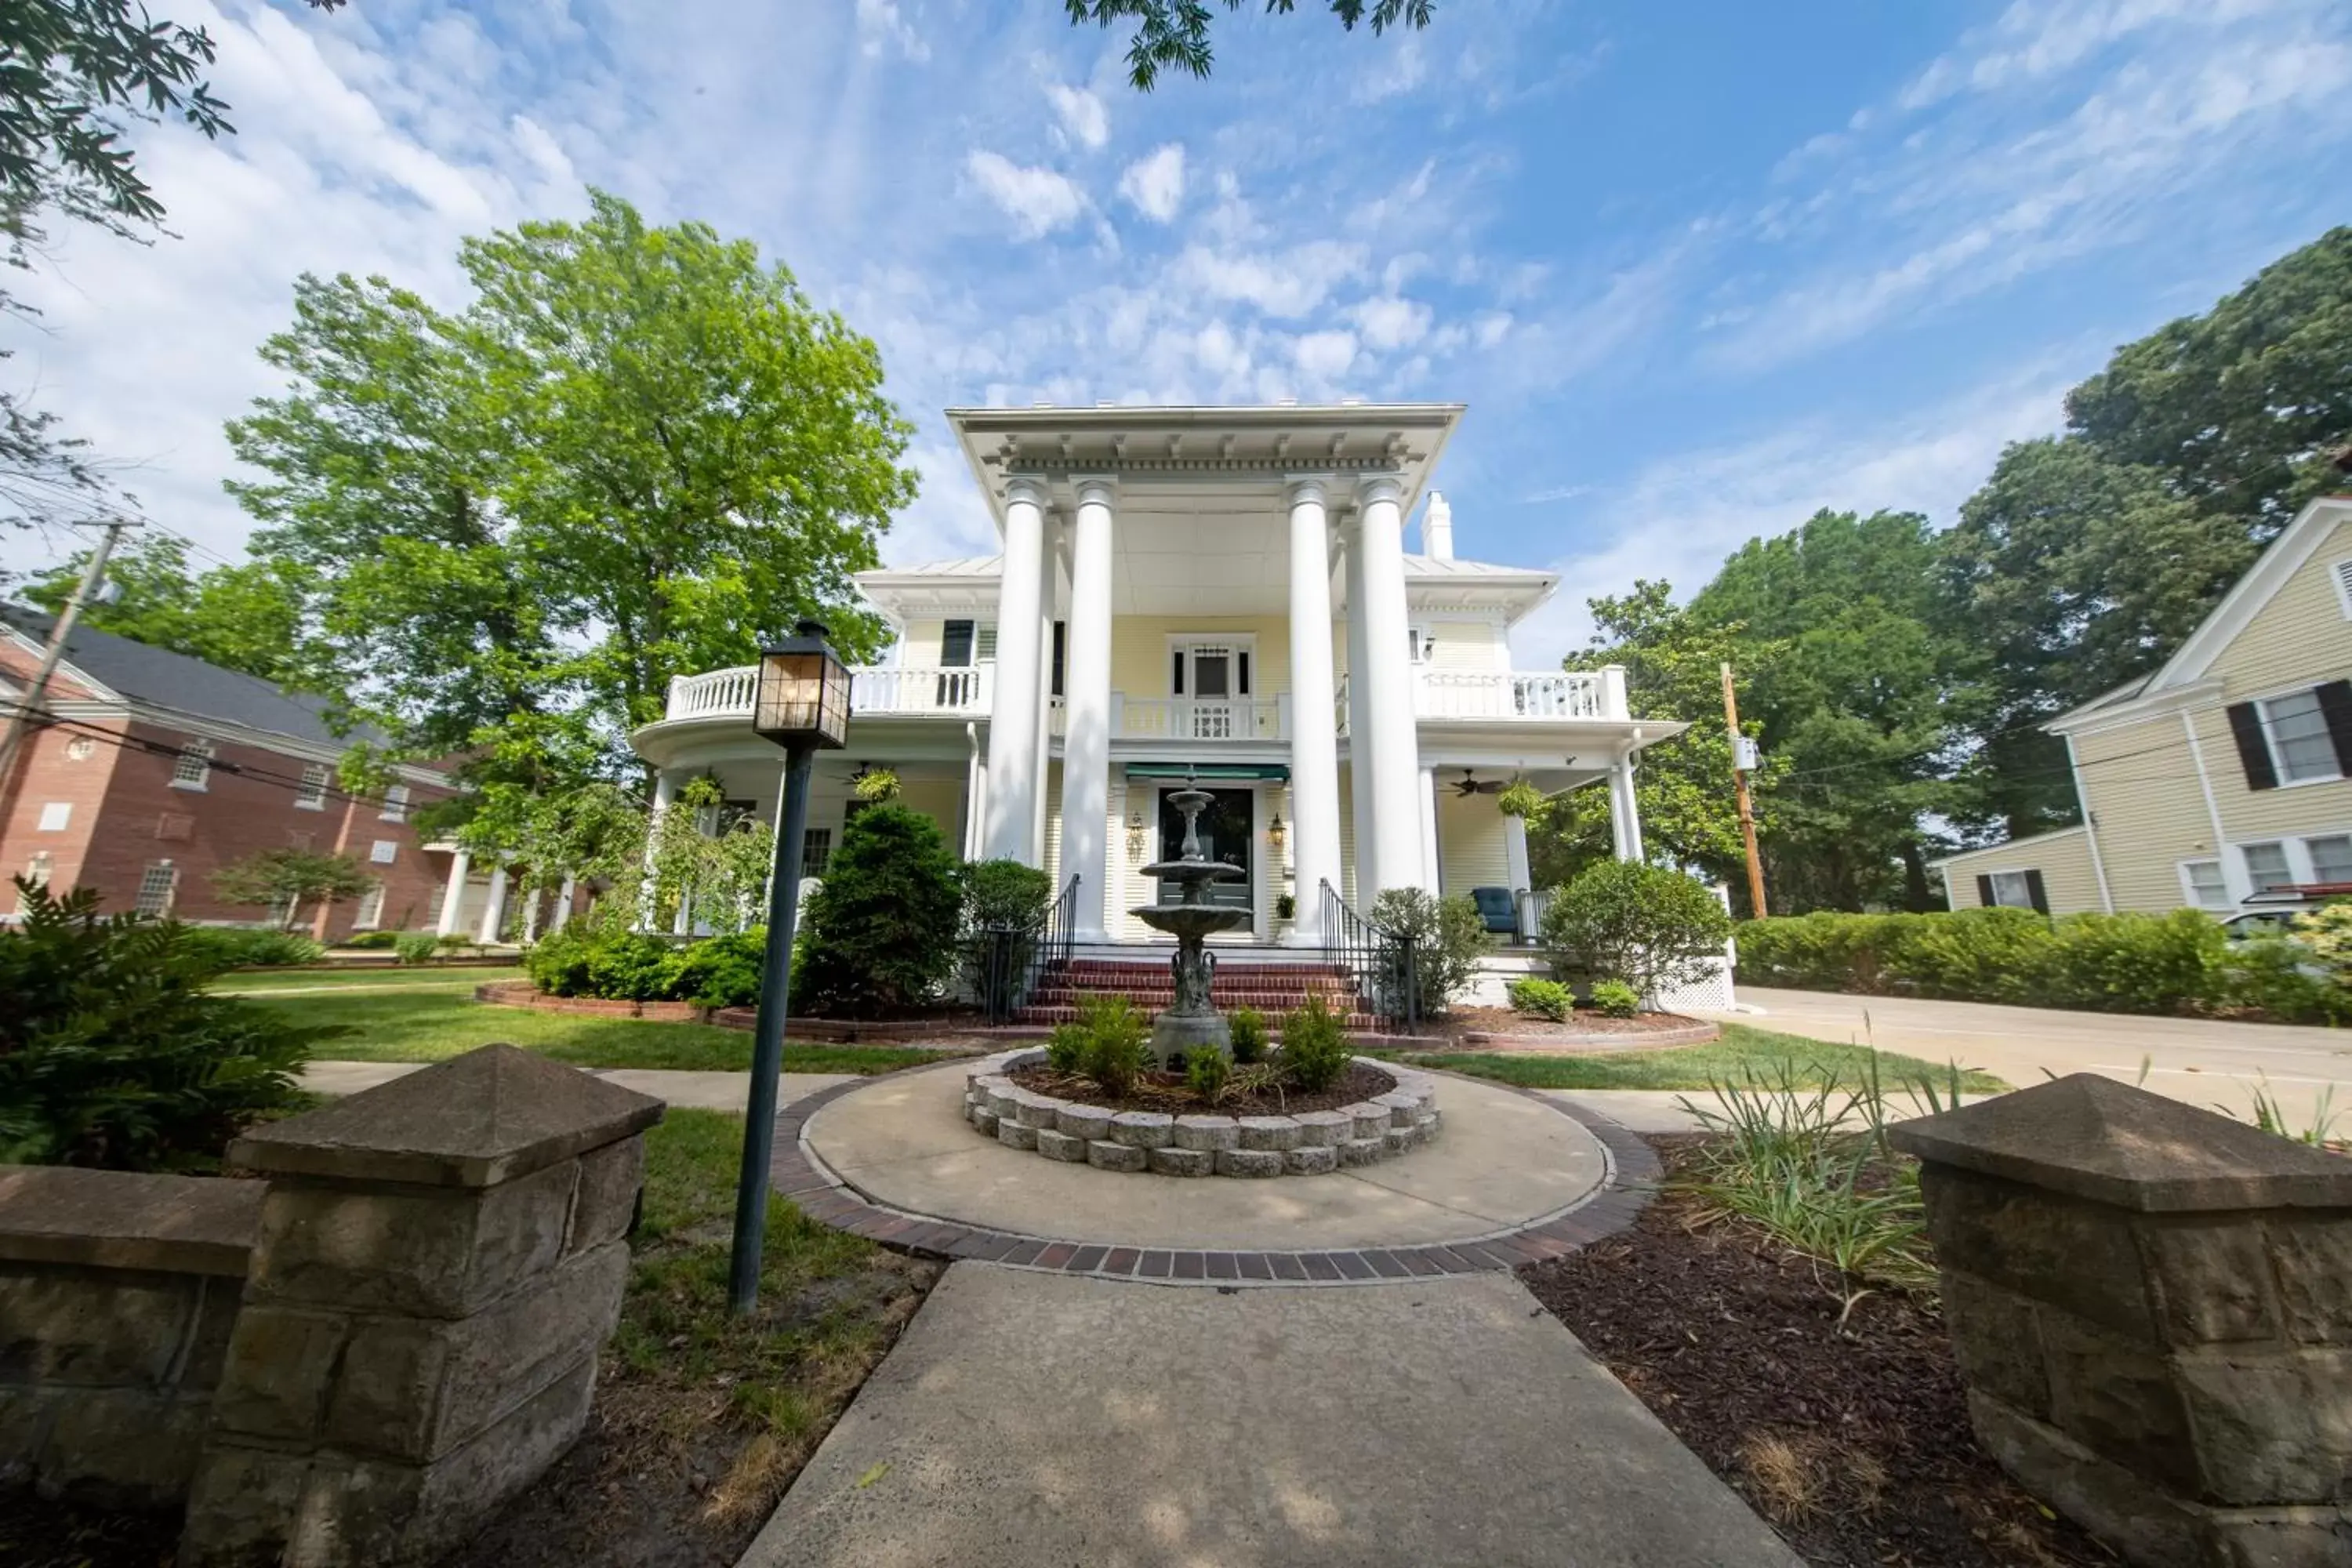 Property Building in The Edenton Collection-The Granville Queen Inn